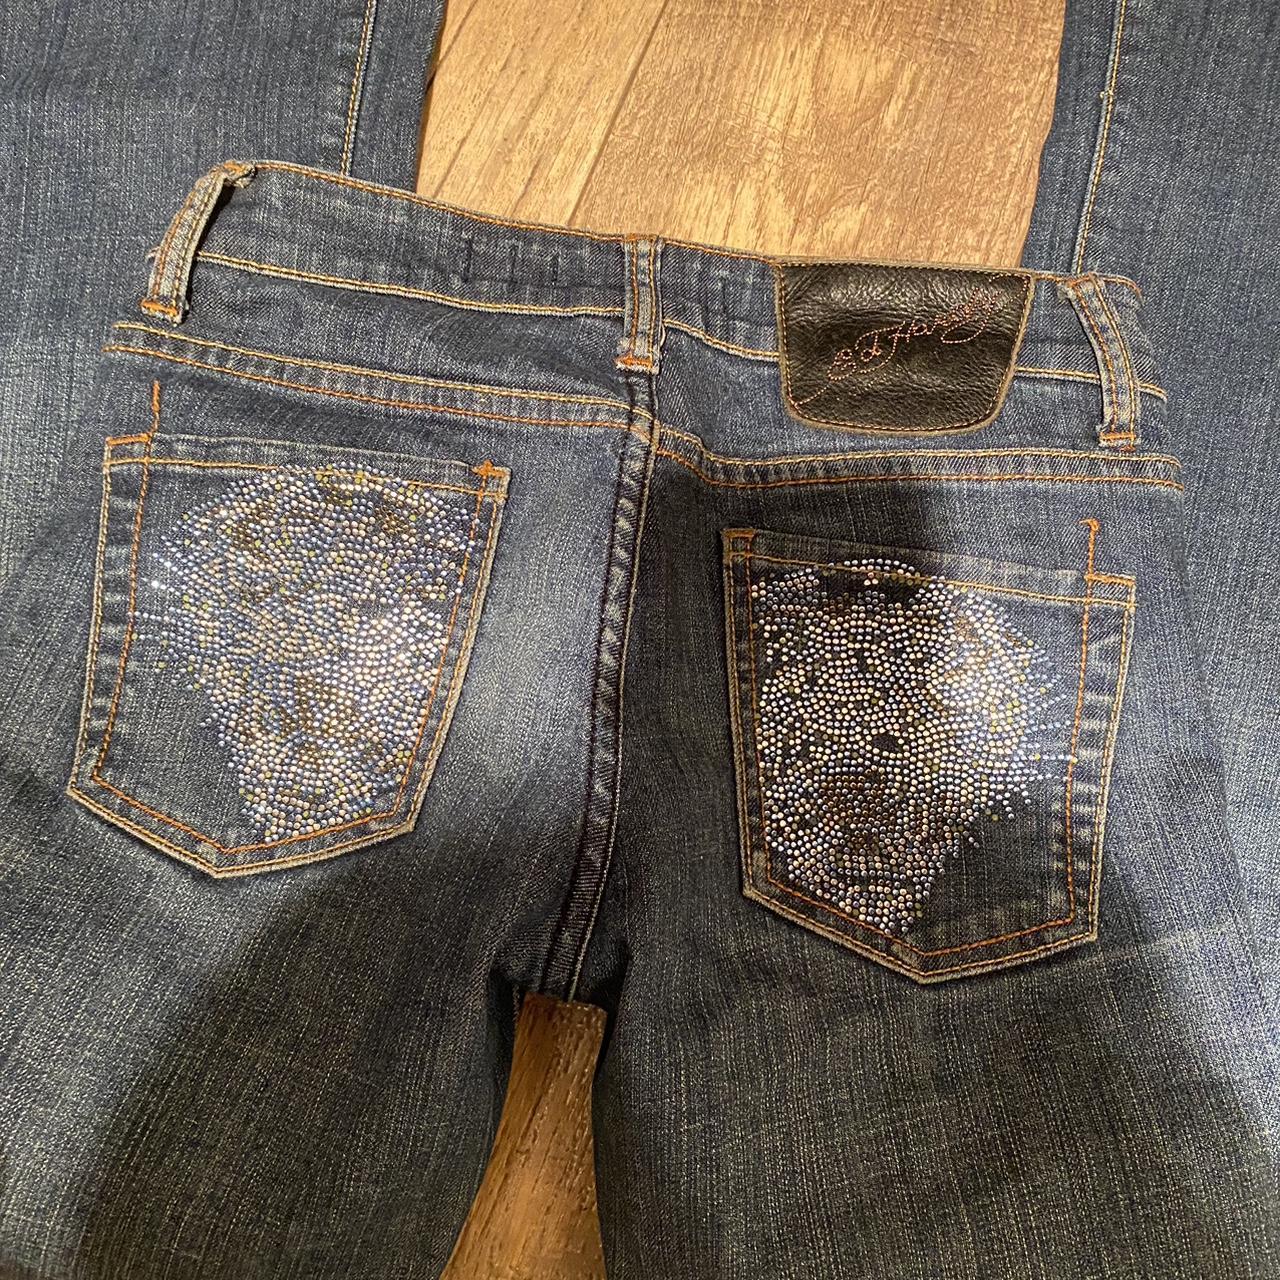 Ed hardy bedazzled jeans No PayPal 🤟🏽 Size... - Depop